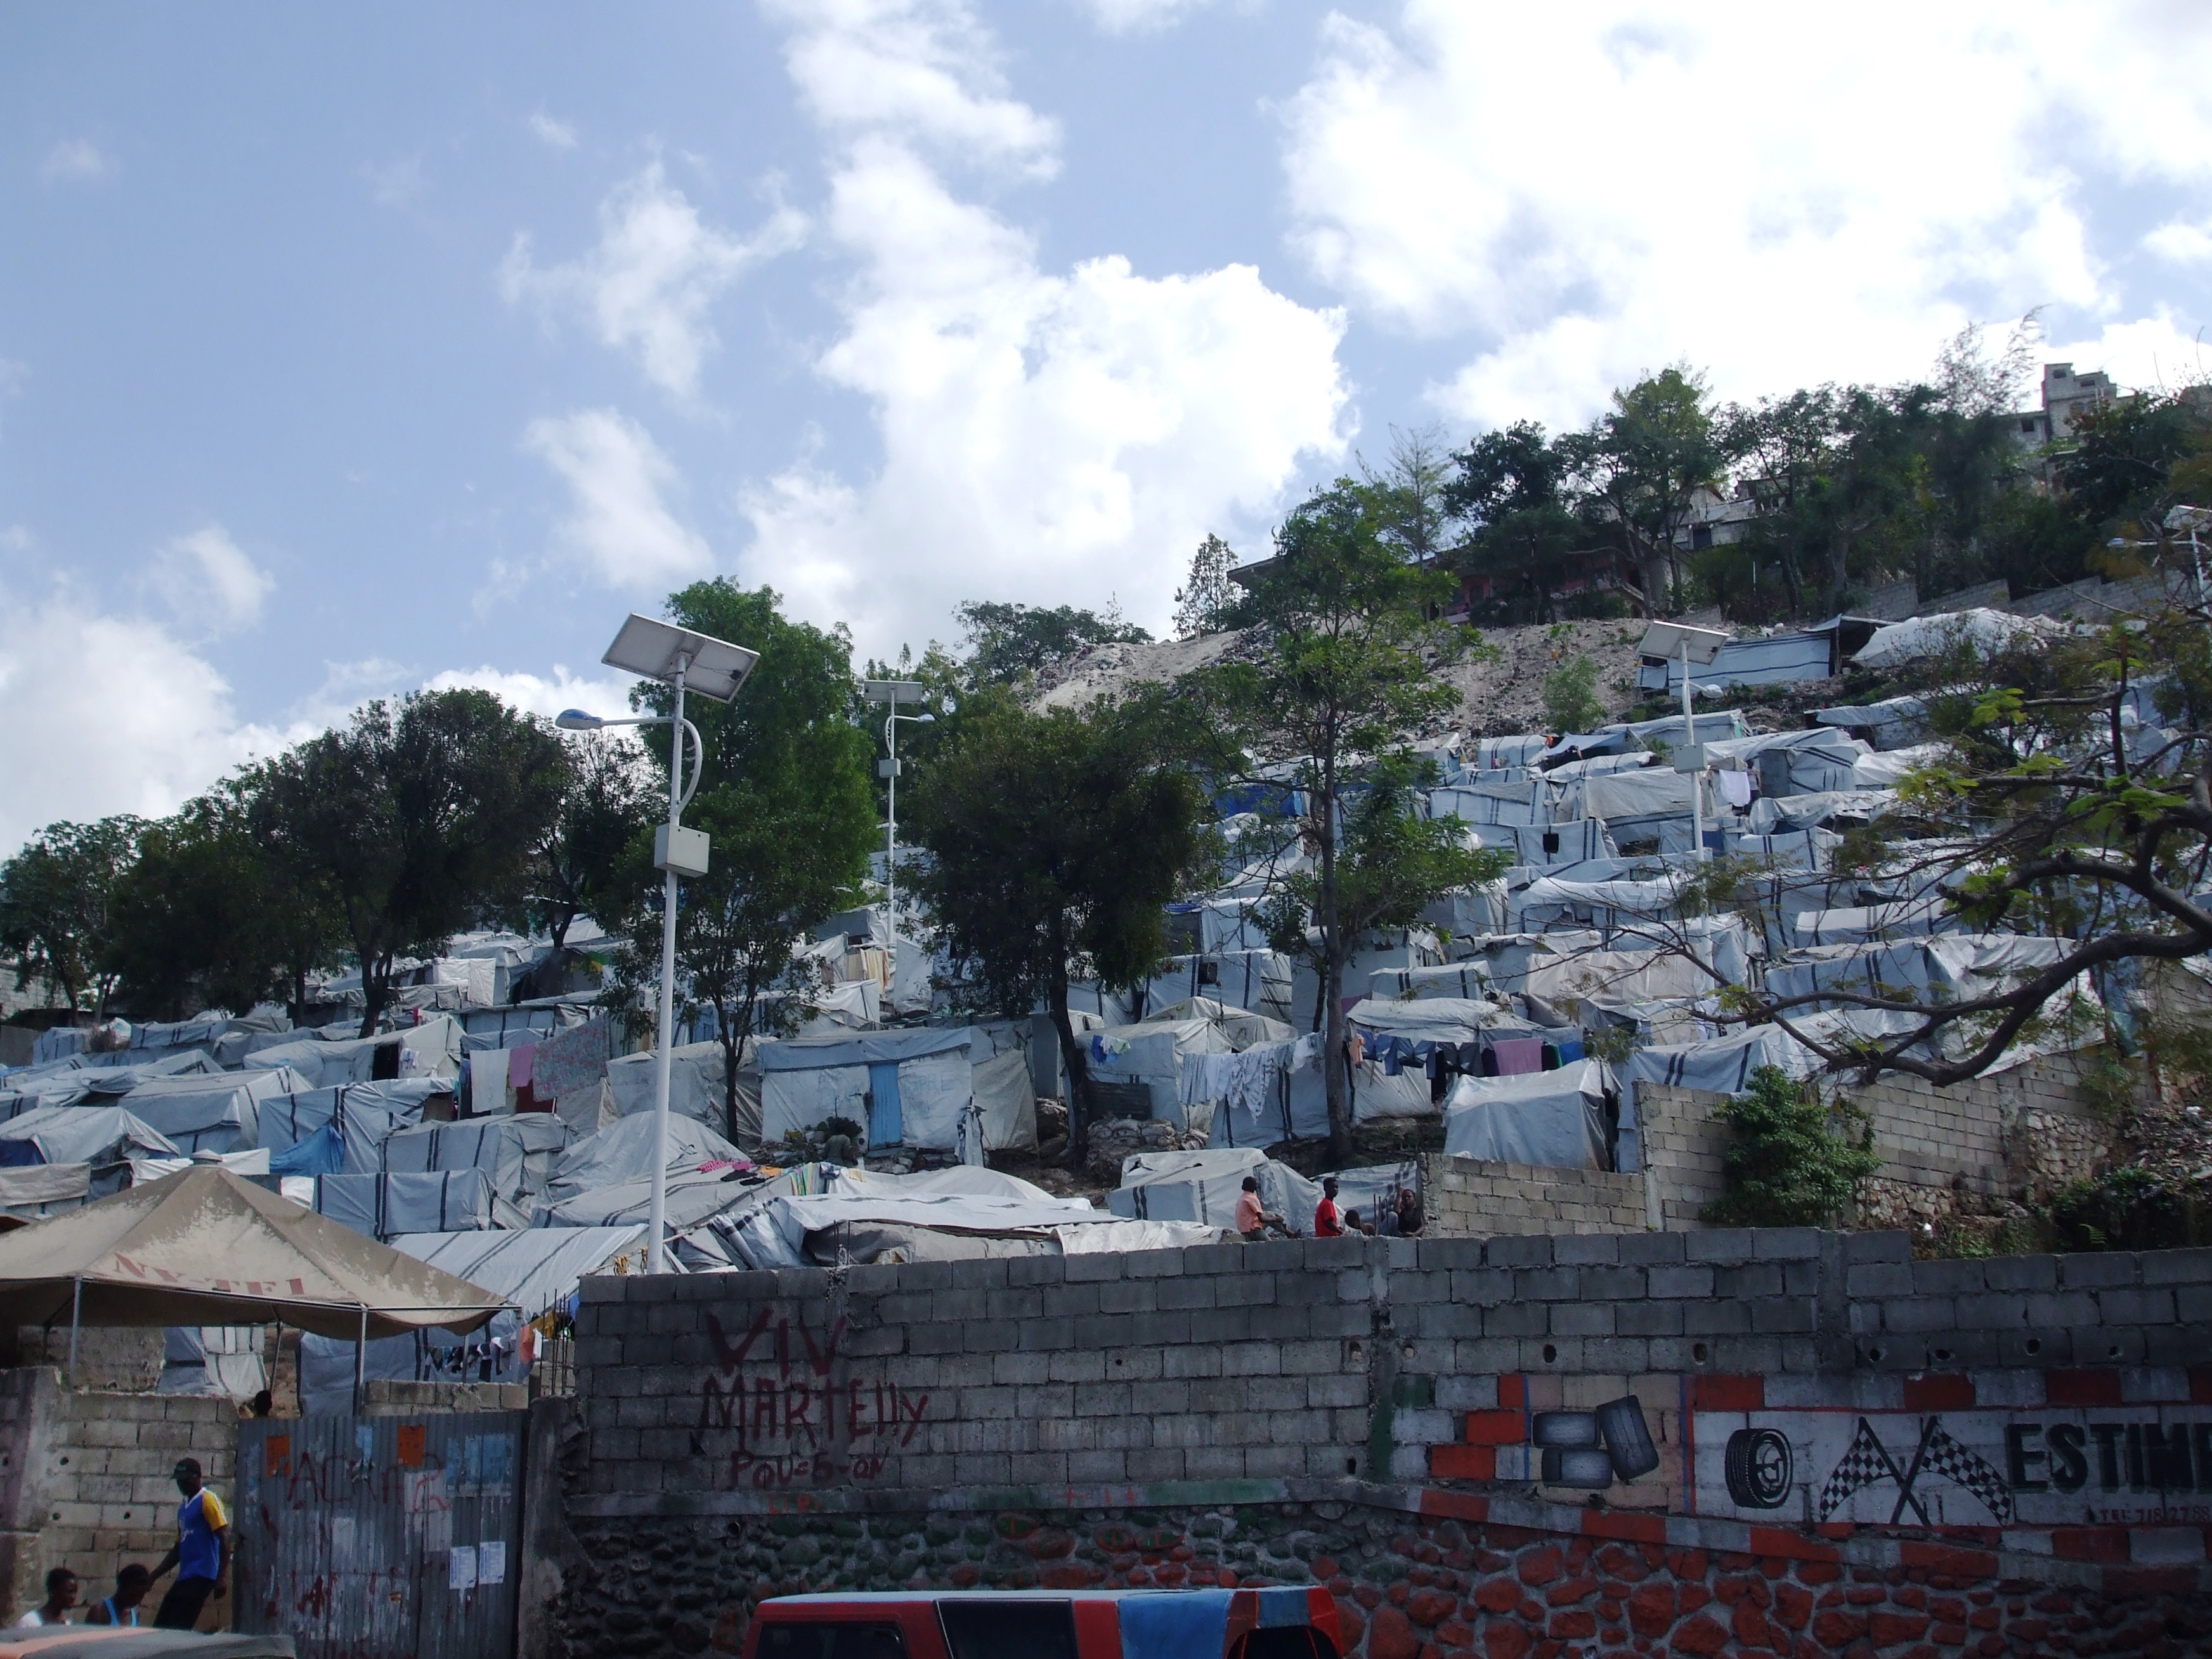 Two years after the disastrous earthquake of 2010, thousands of Haitians are still living in temporary shelters.